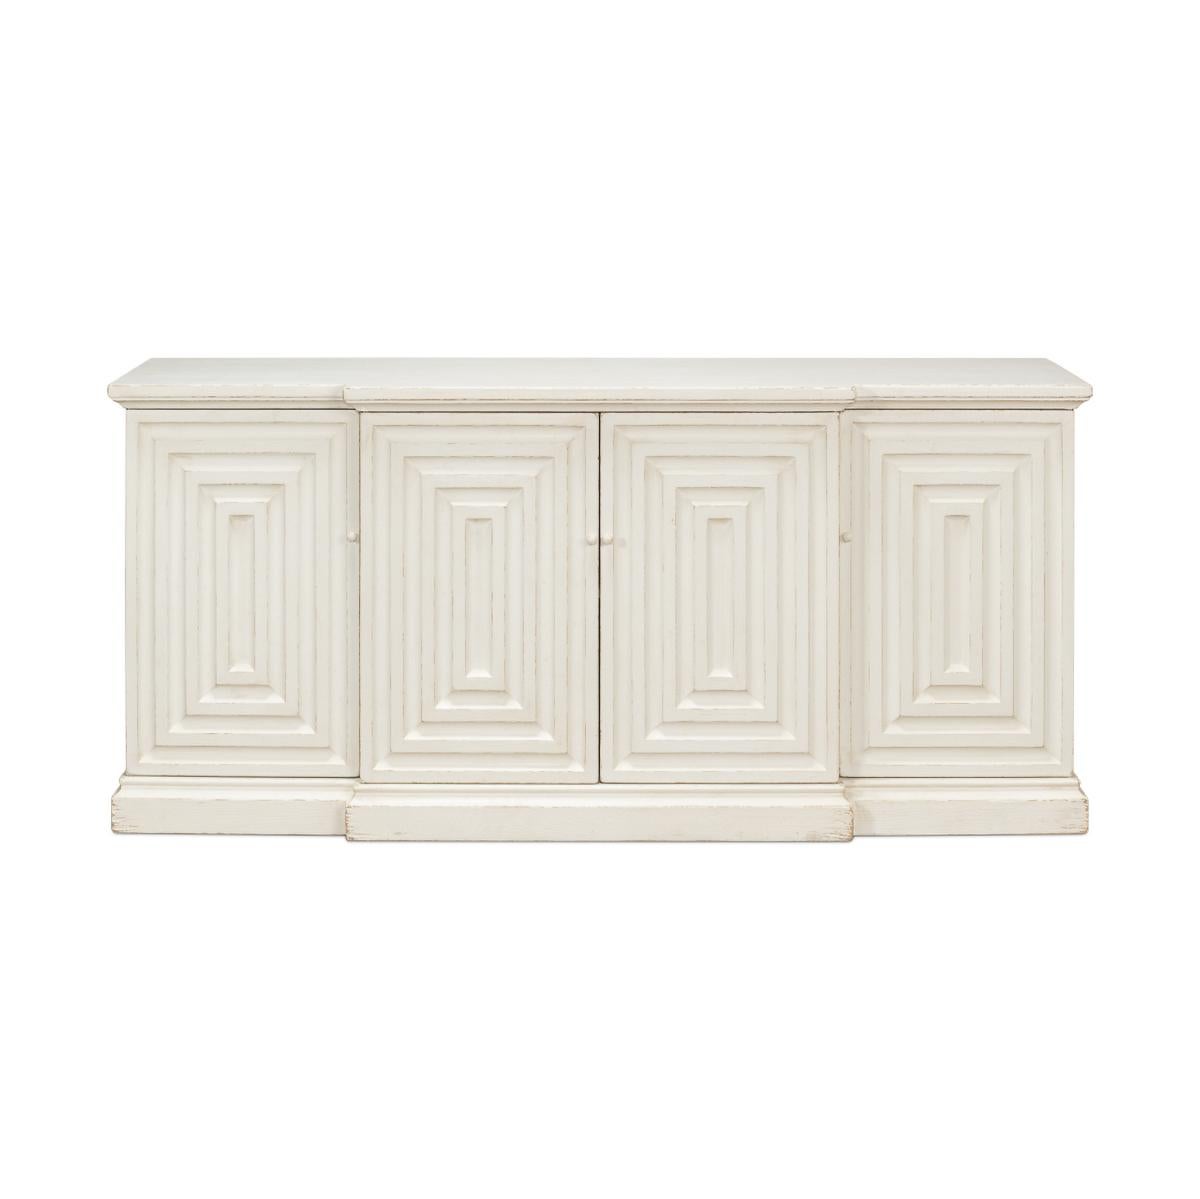 French transitional painted sideboard, in an antiqued white distressed painted finish, the breakfront sideboard has geometrical relief panels to the four doors, with interior shelves and raised on a plinth base.

Dimensions: 75